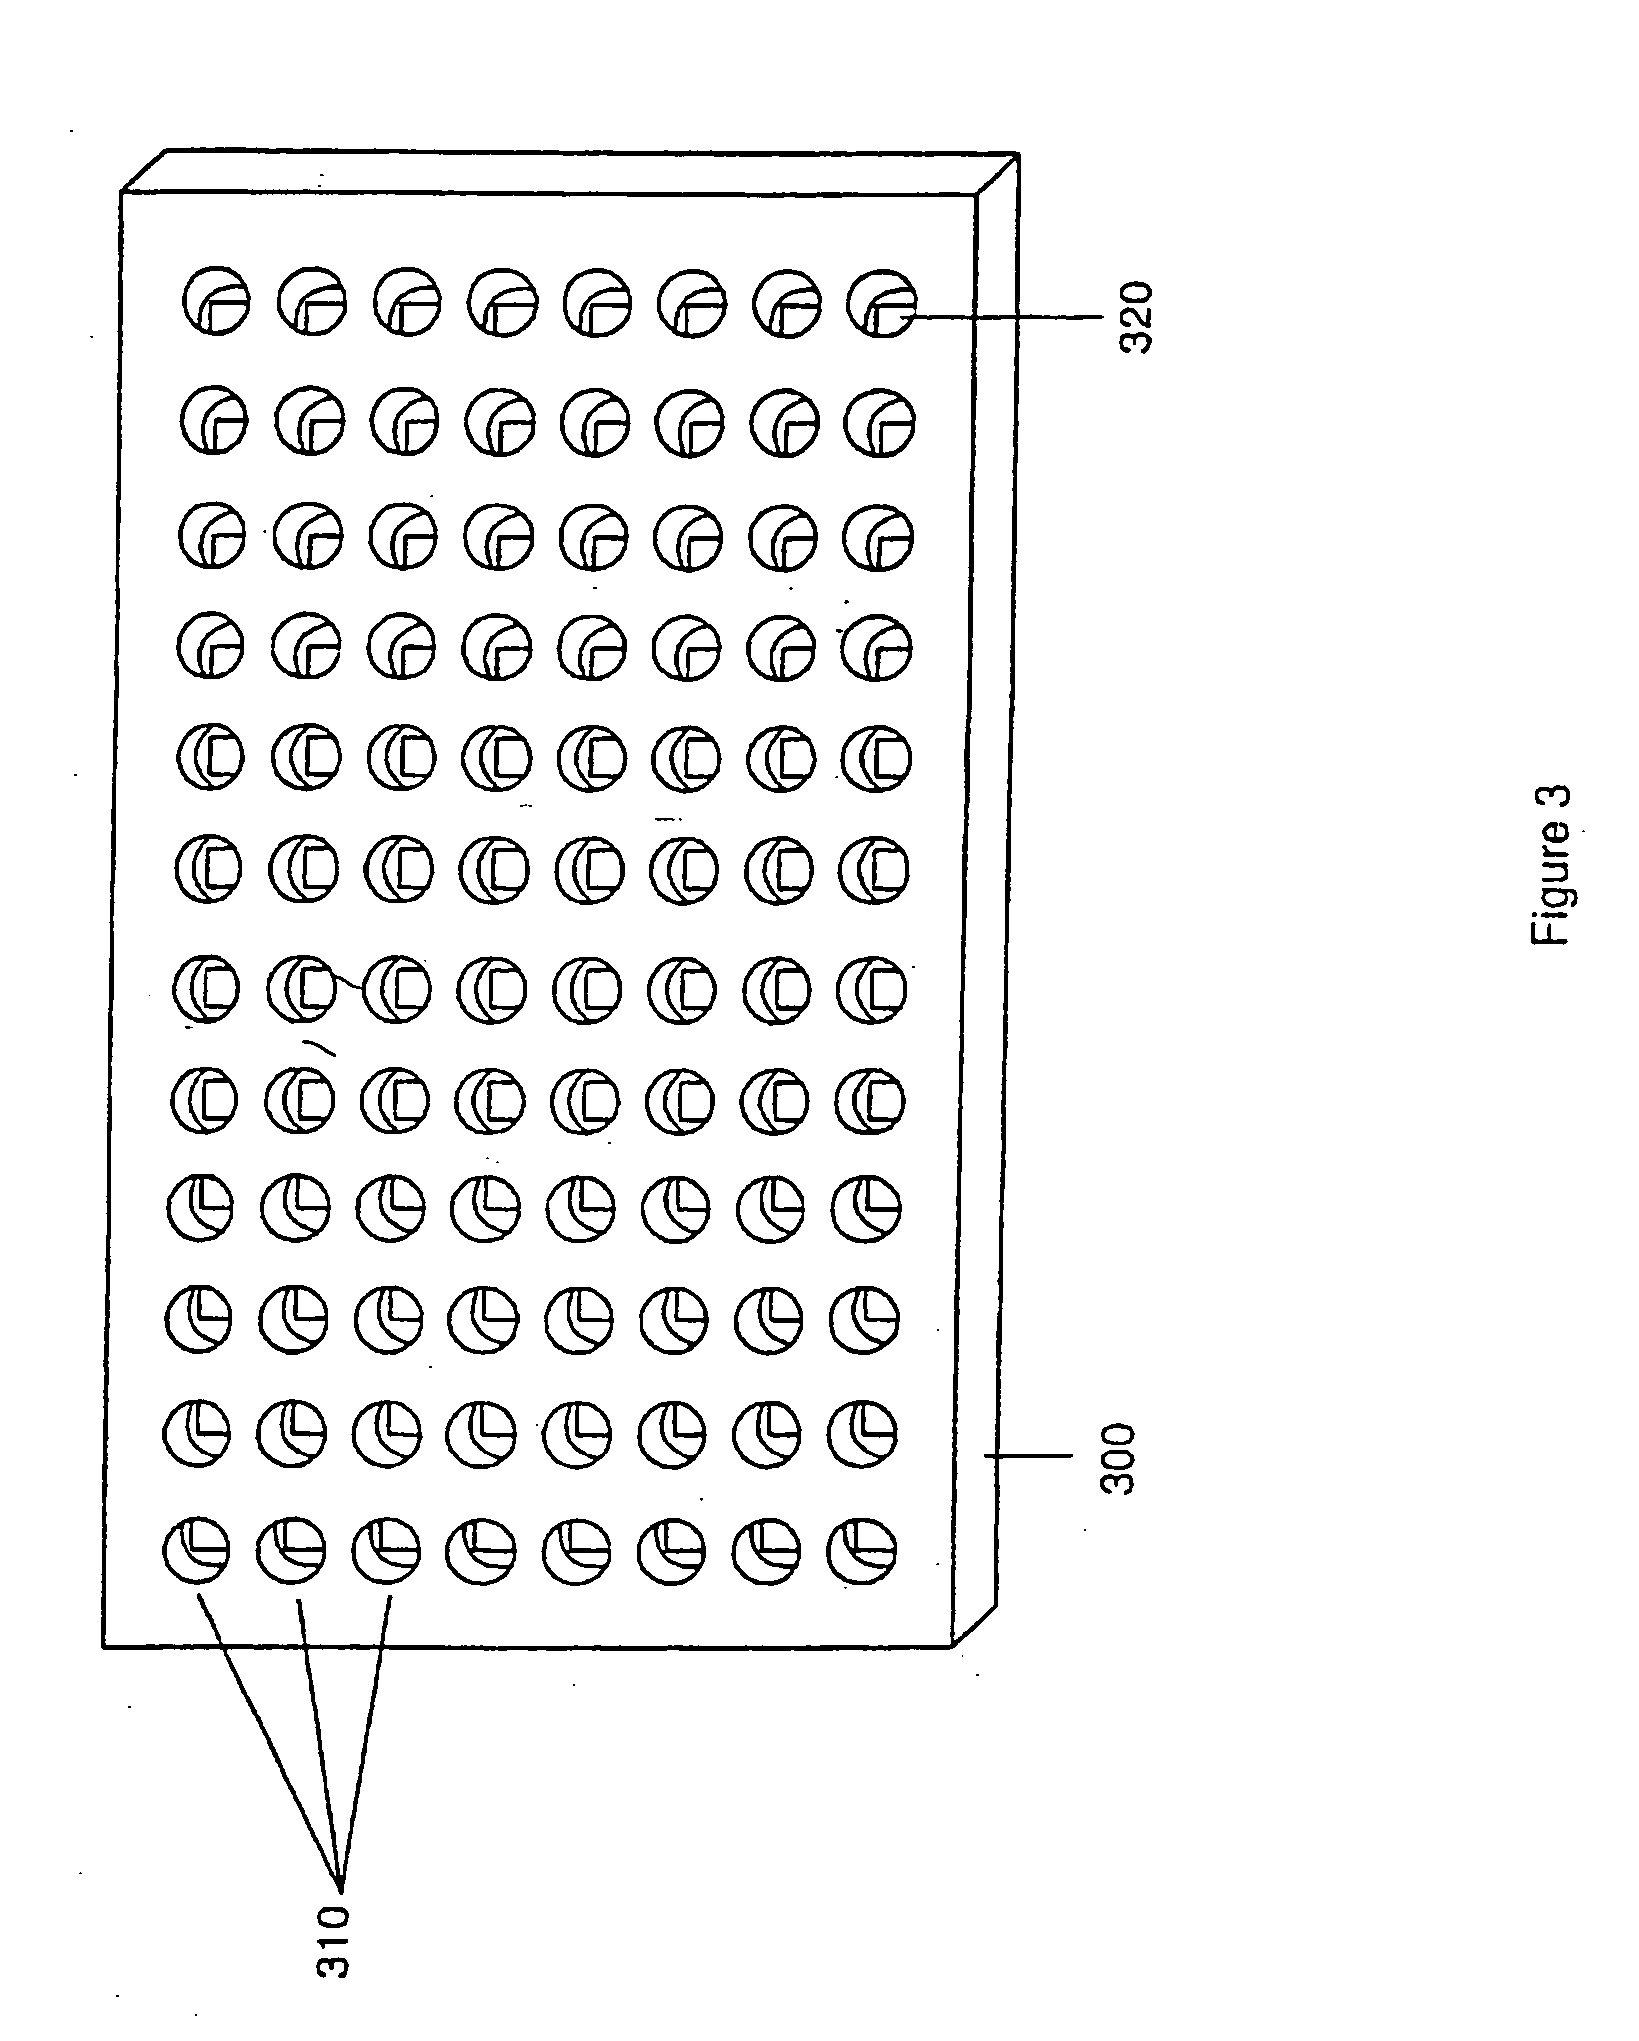 Methods for making a device for concurrently processing multiple biological chip assays